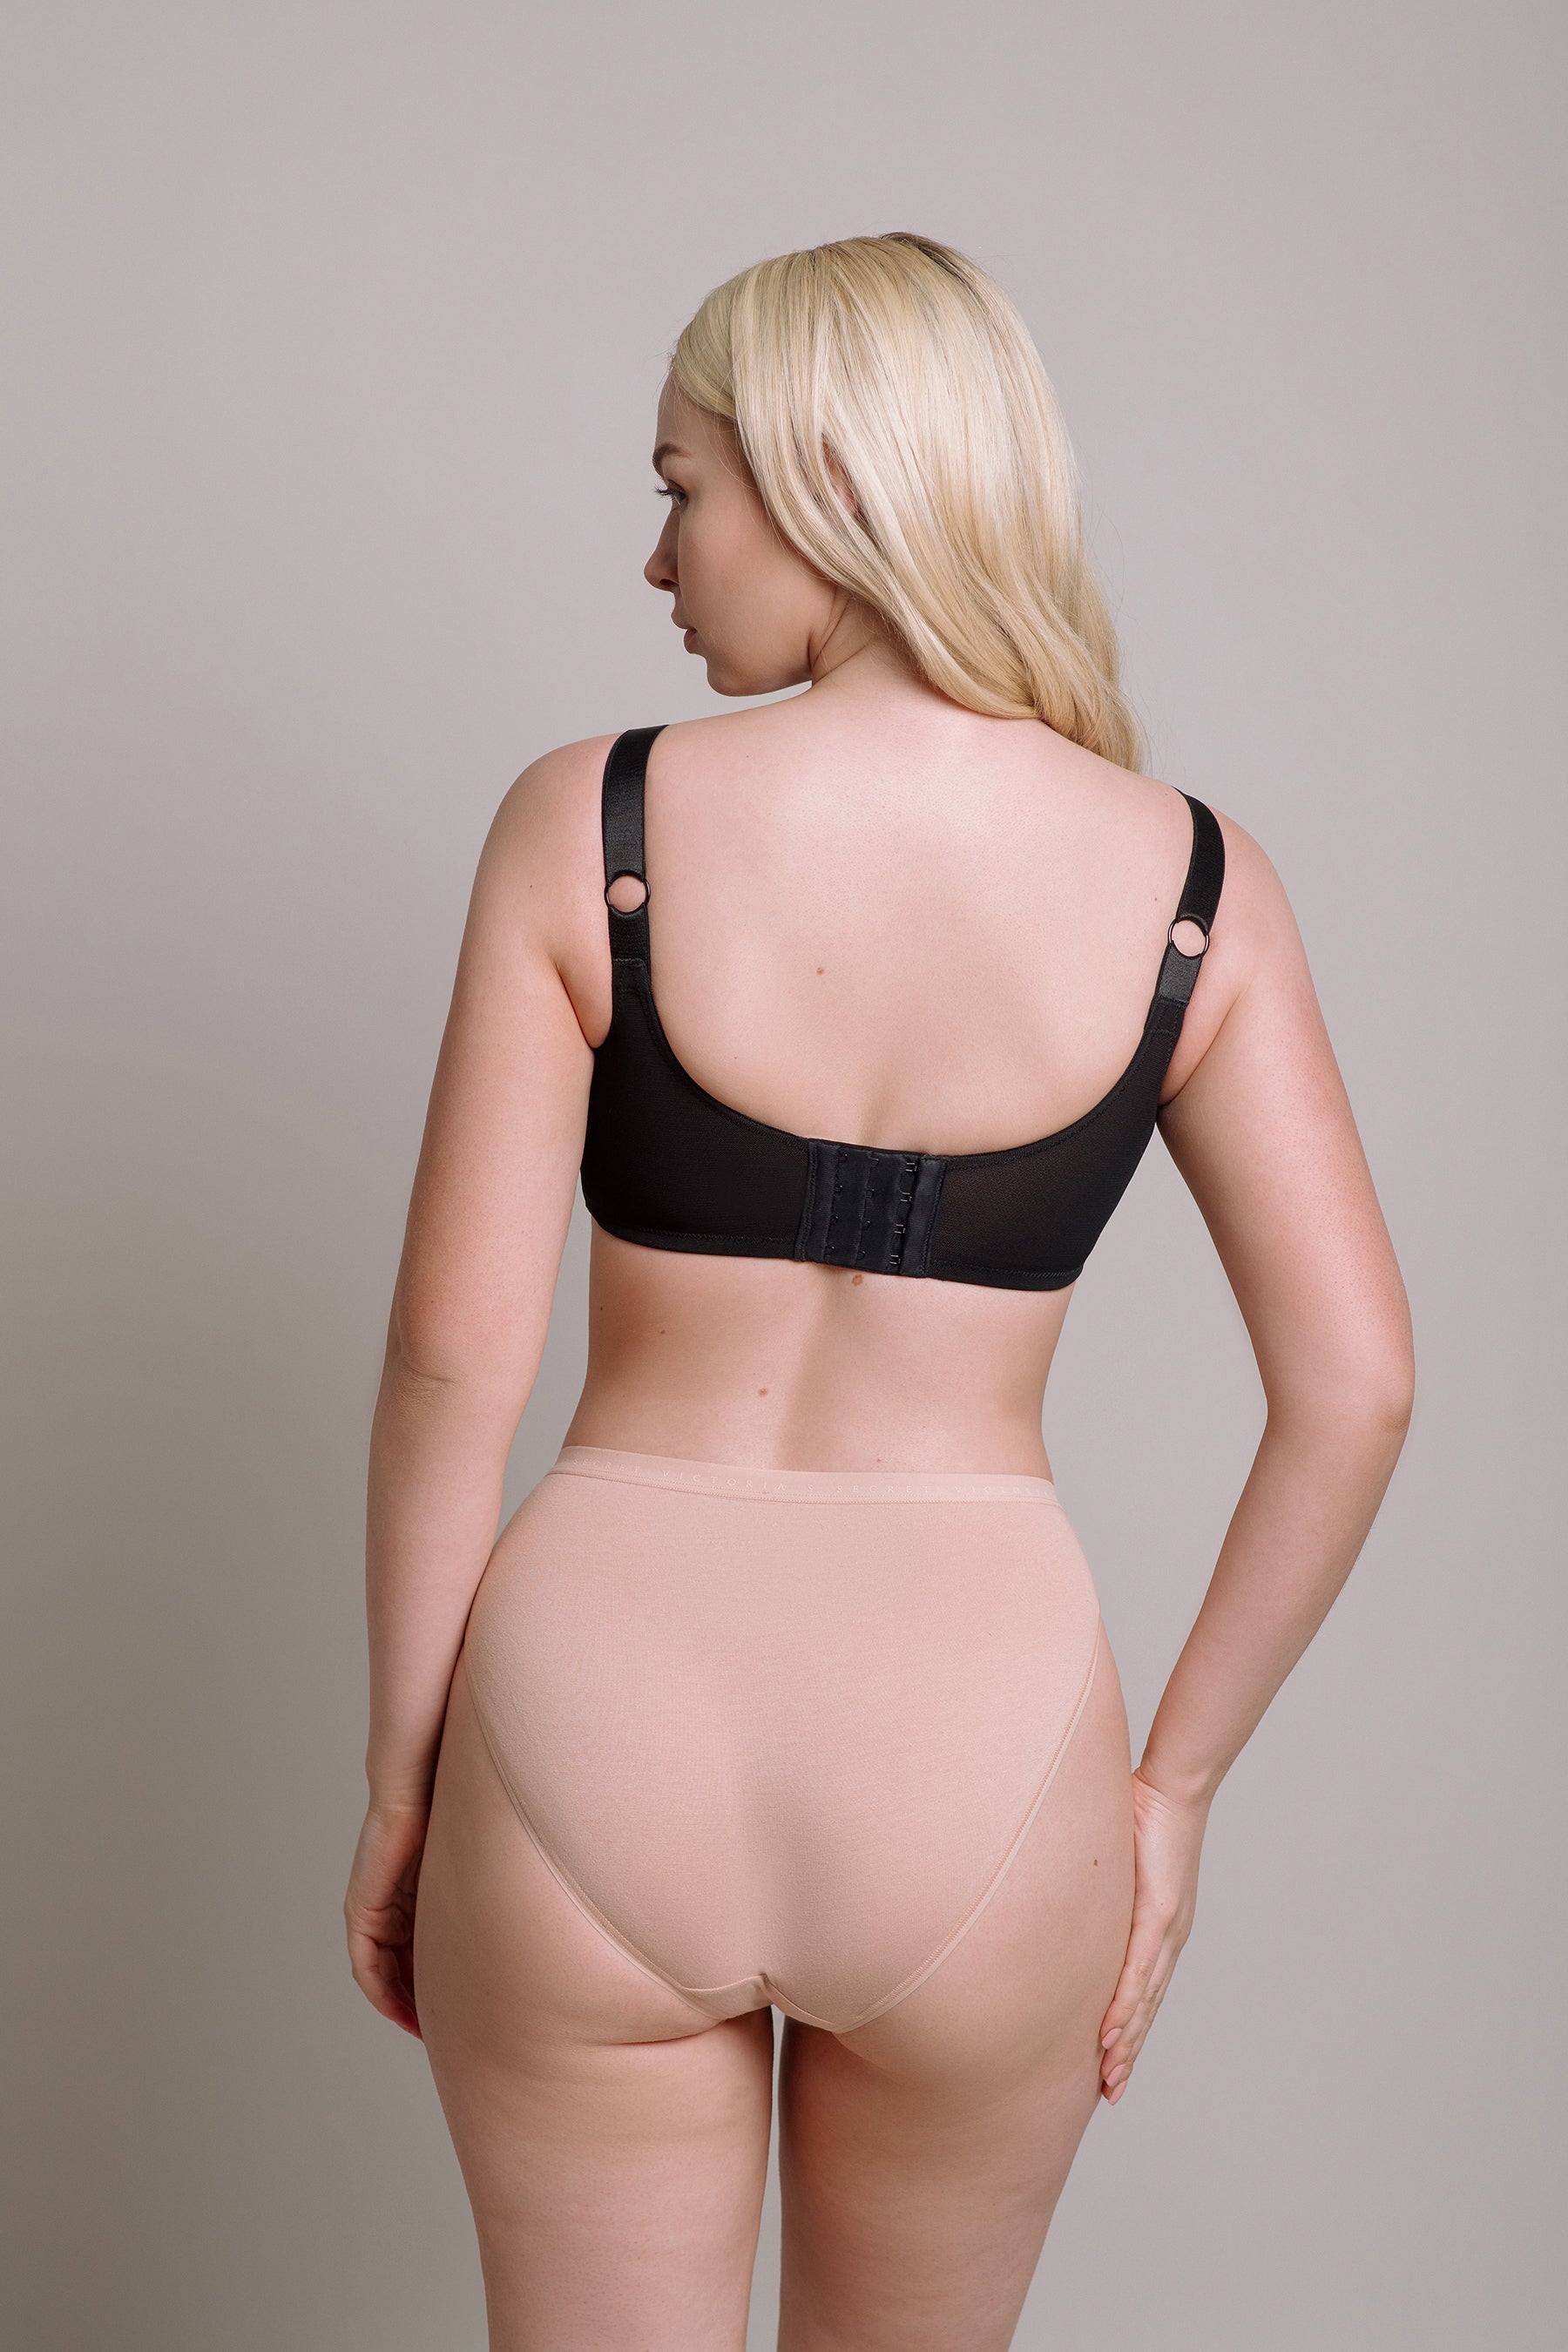 Body Magazine // Wholesale Lingerie News // Kaye Larcky Coming To August  Curve Show